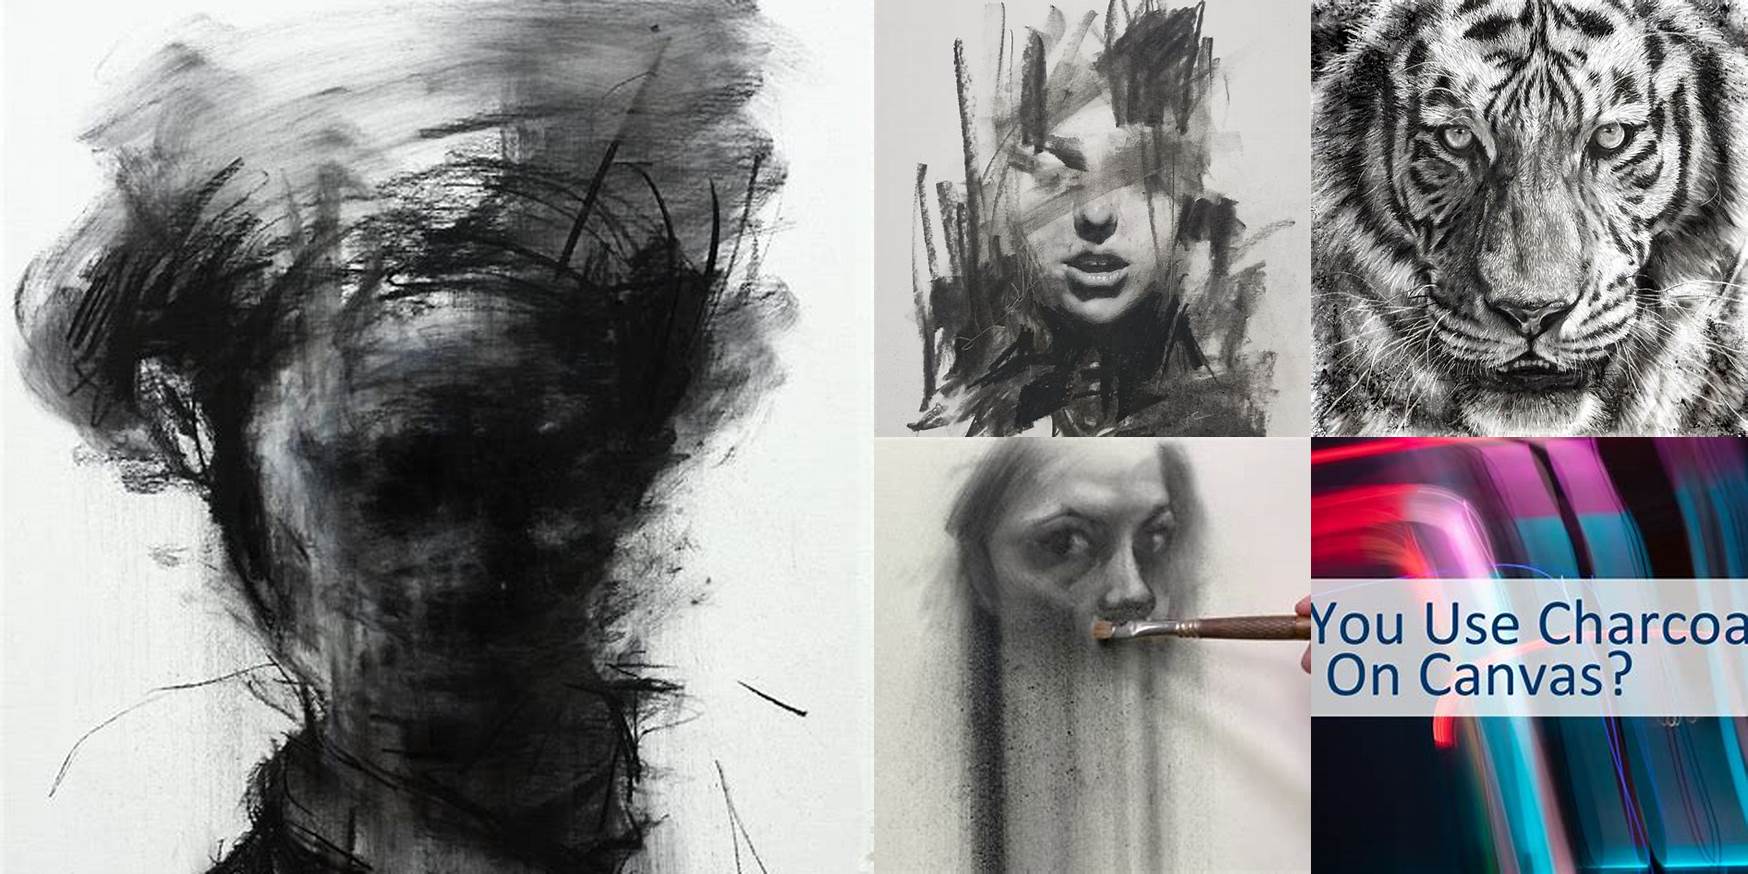 Can You Use Charcoal On Canvas